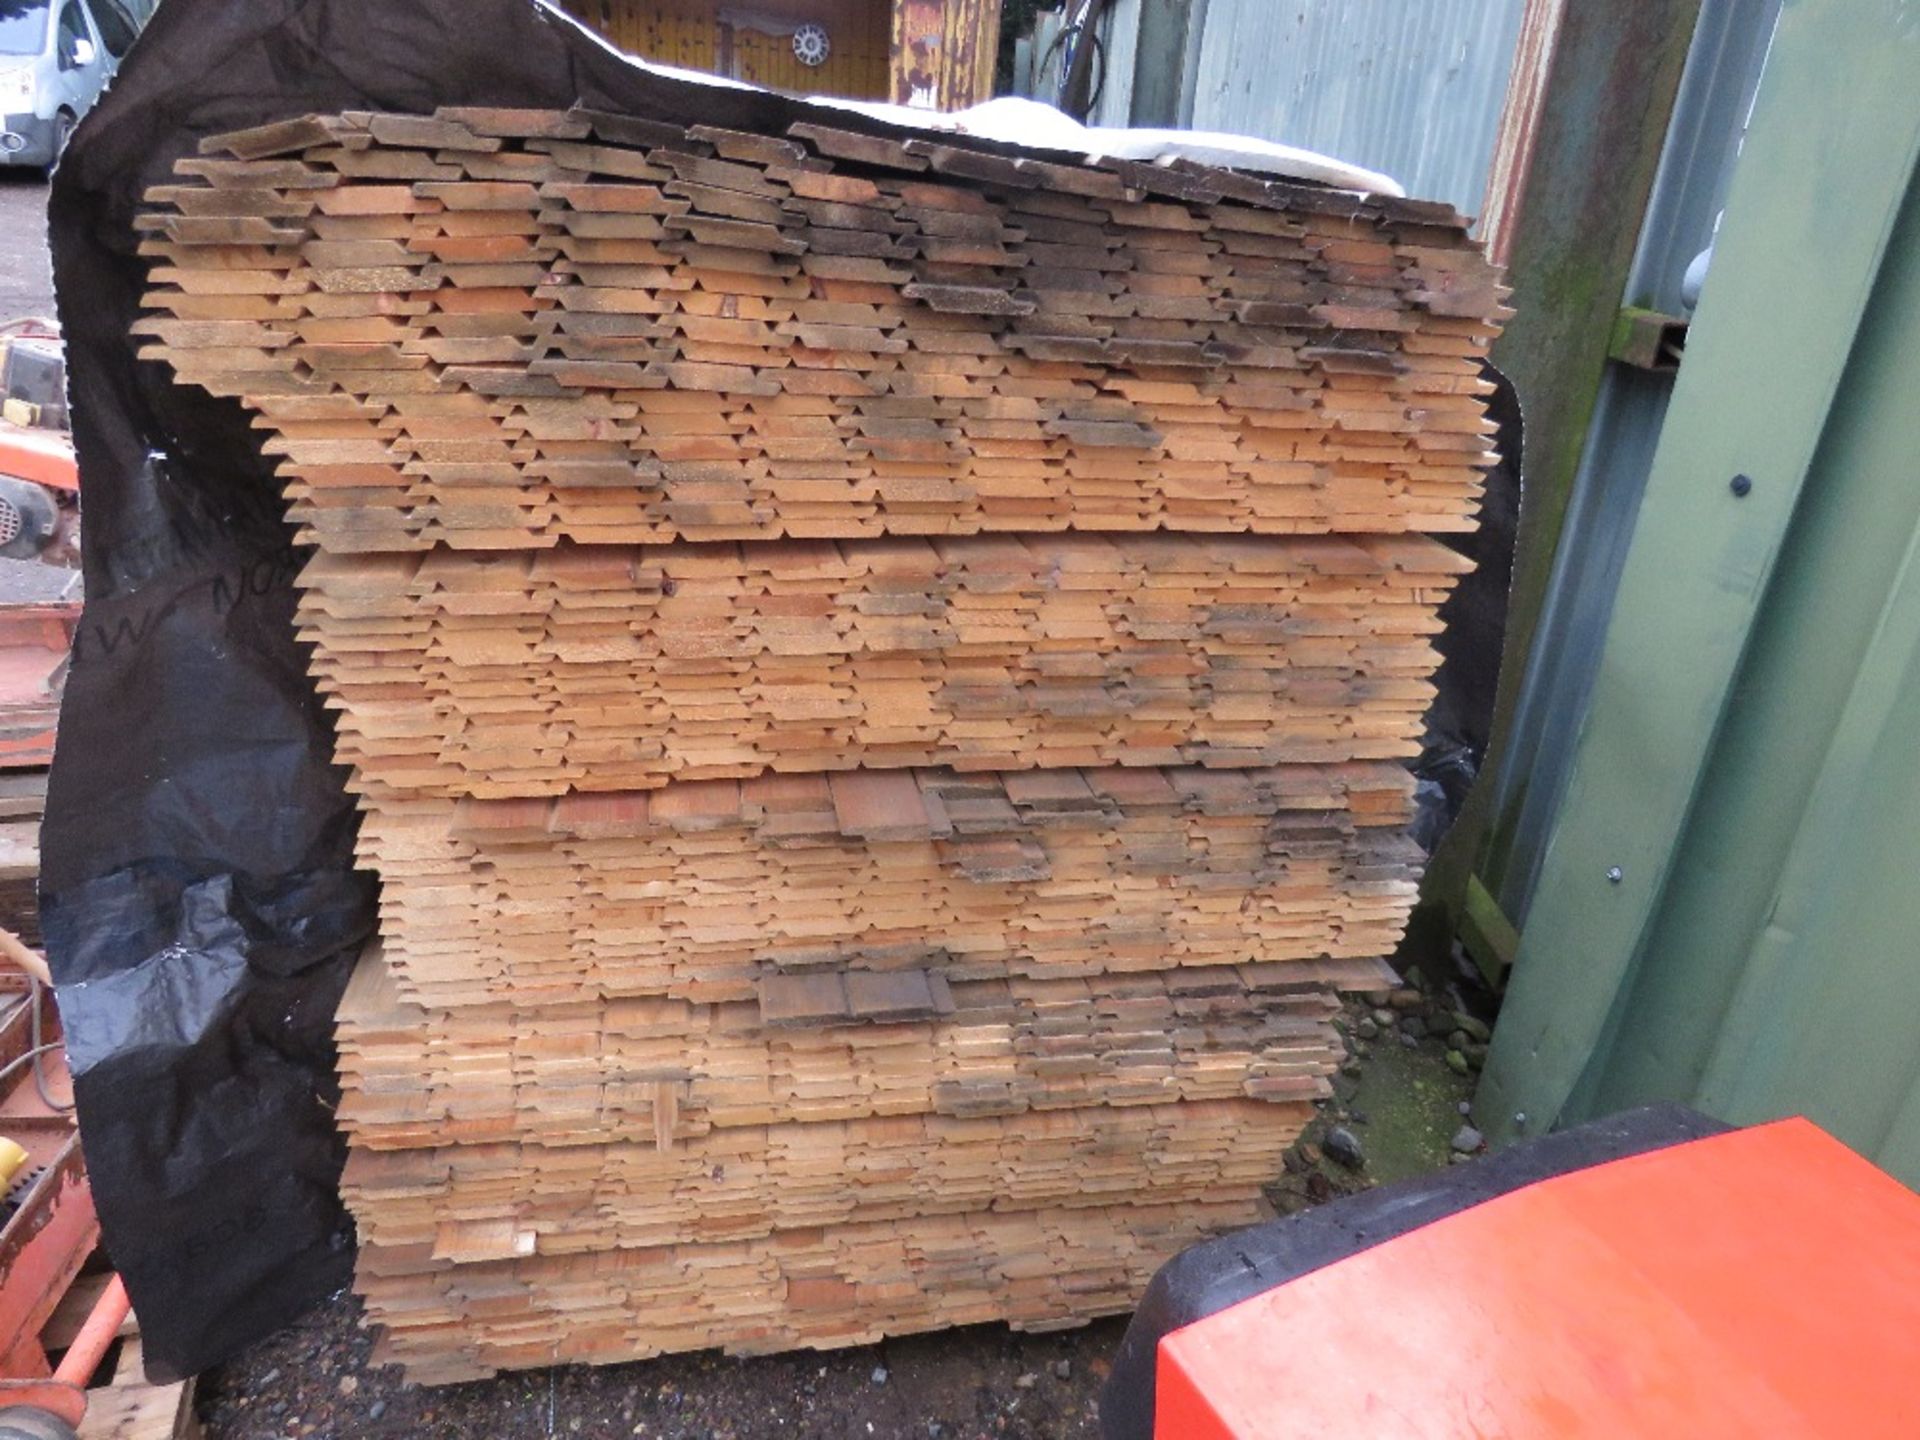 EXTRA LARGE PACK OF UNTREATED SHIPLAP CLADDING TIMBER BOARDS: 1.73M LENGTH X 10CM WIDTH APPROX. - Image 2 of 3